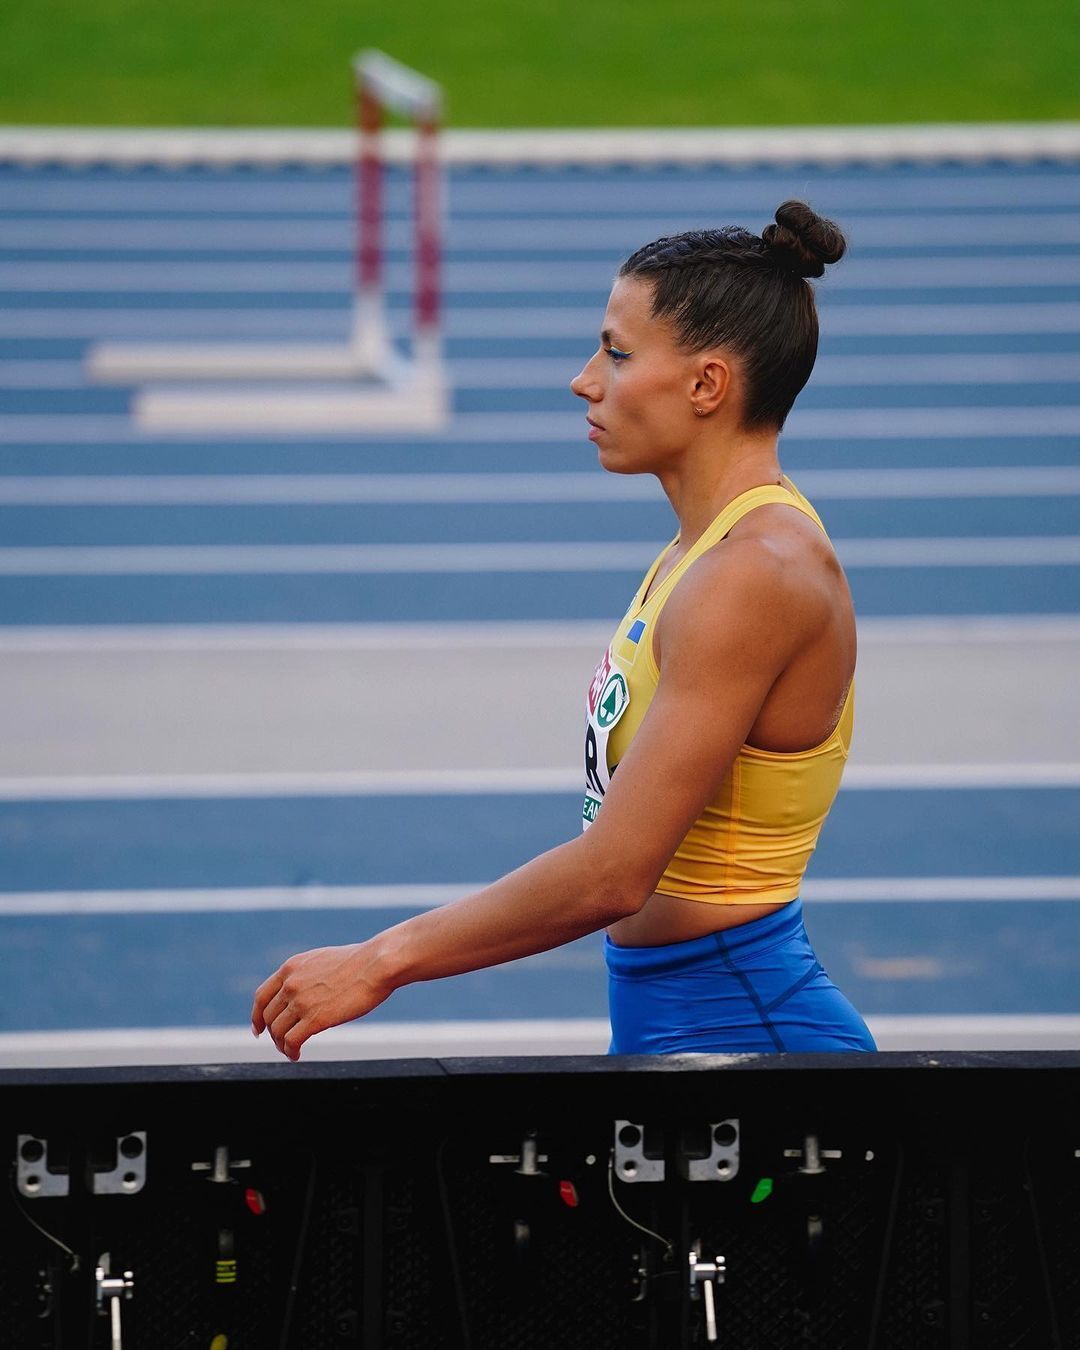 Maryna Bekh-Romanchuk refused to compete in the finals of the 2023 Diamond League 